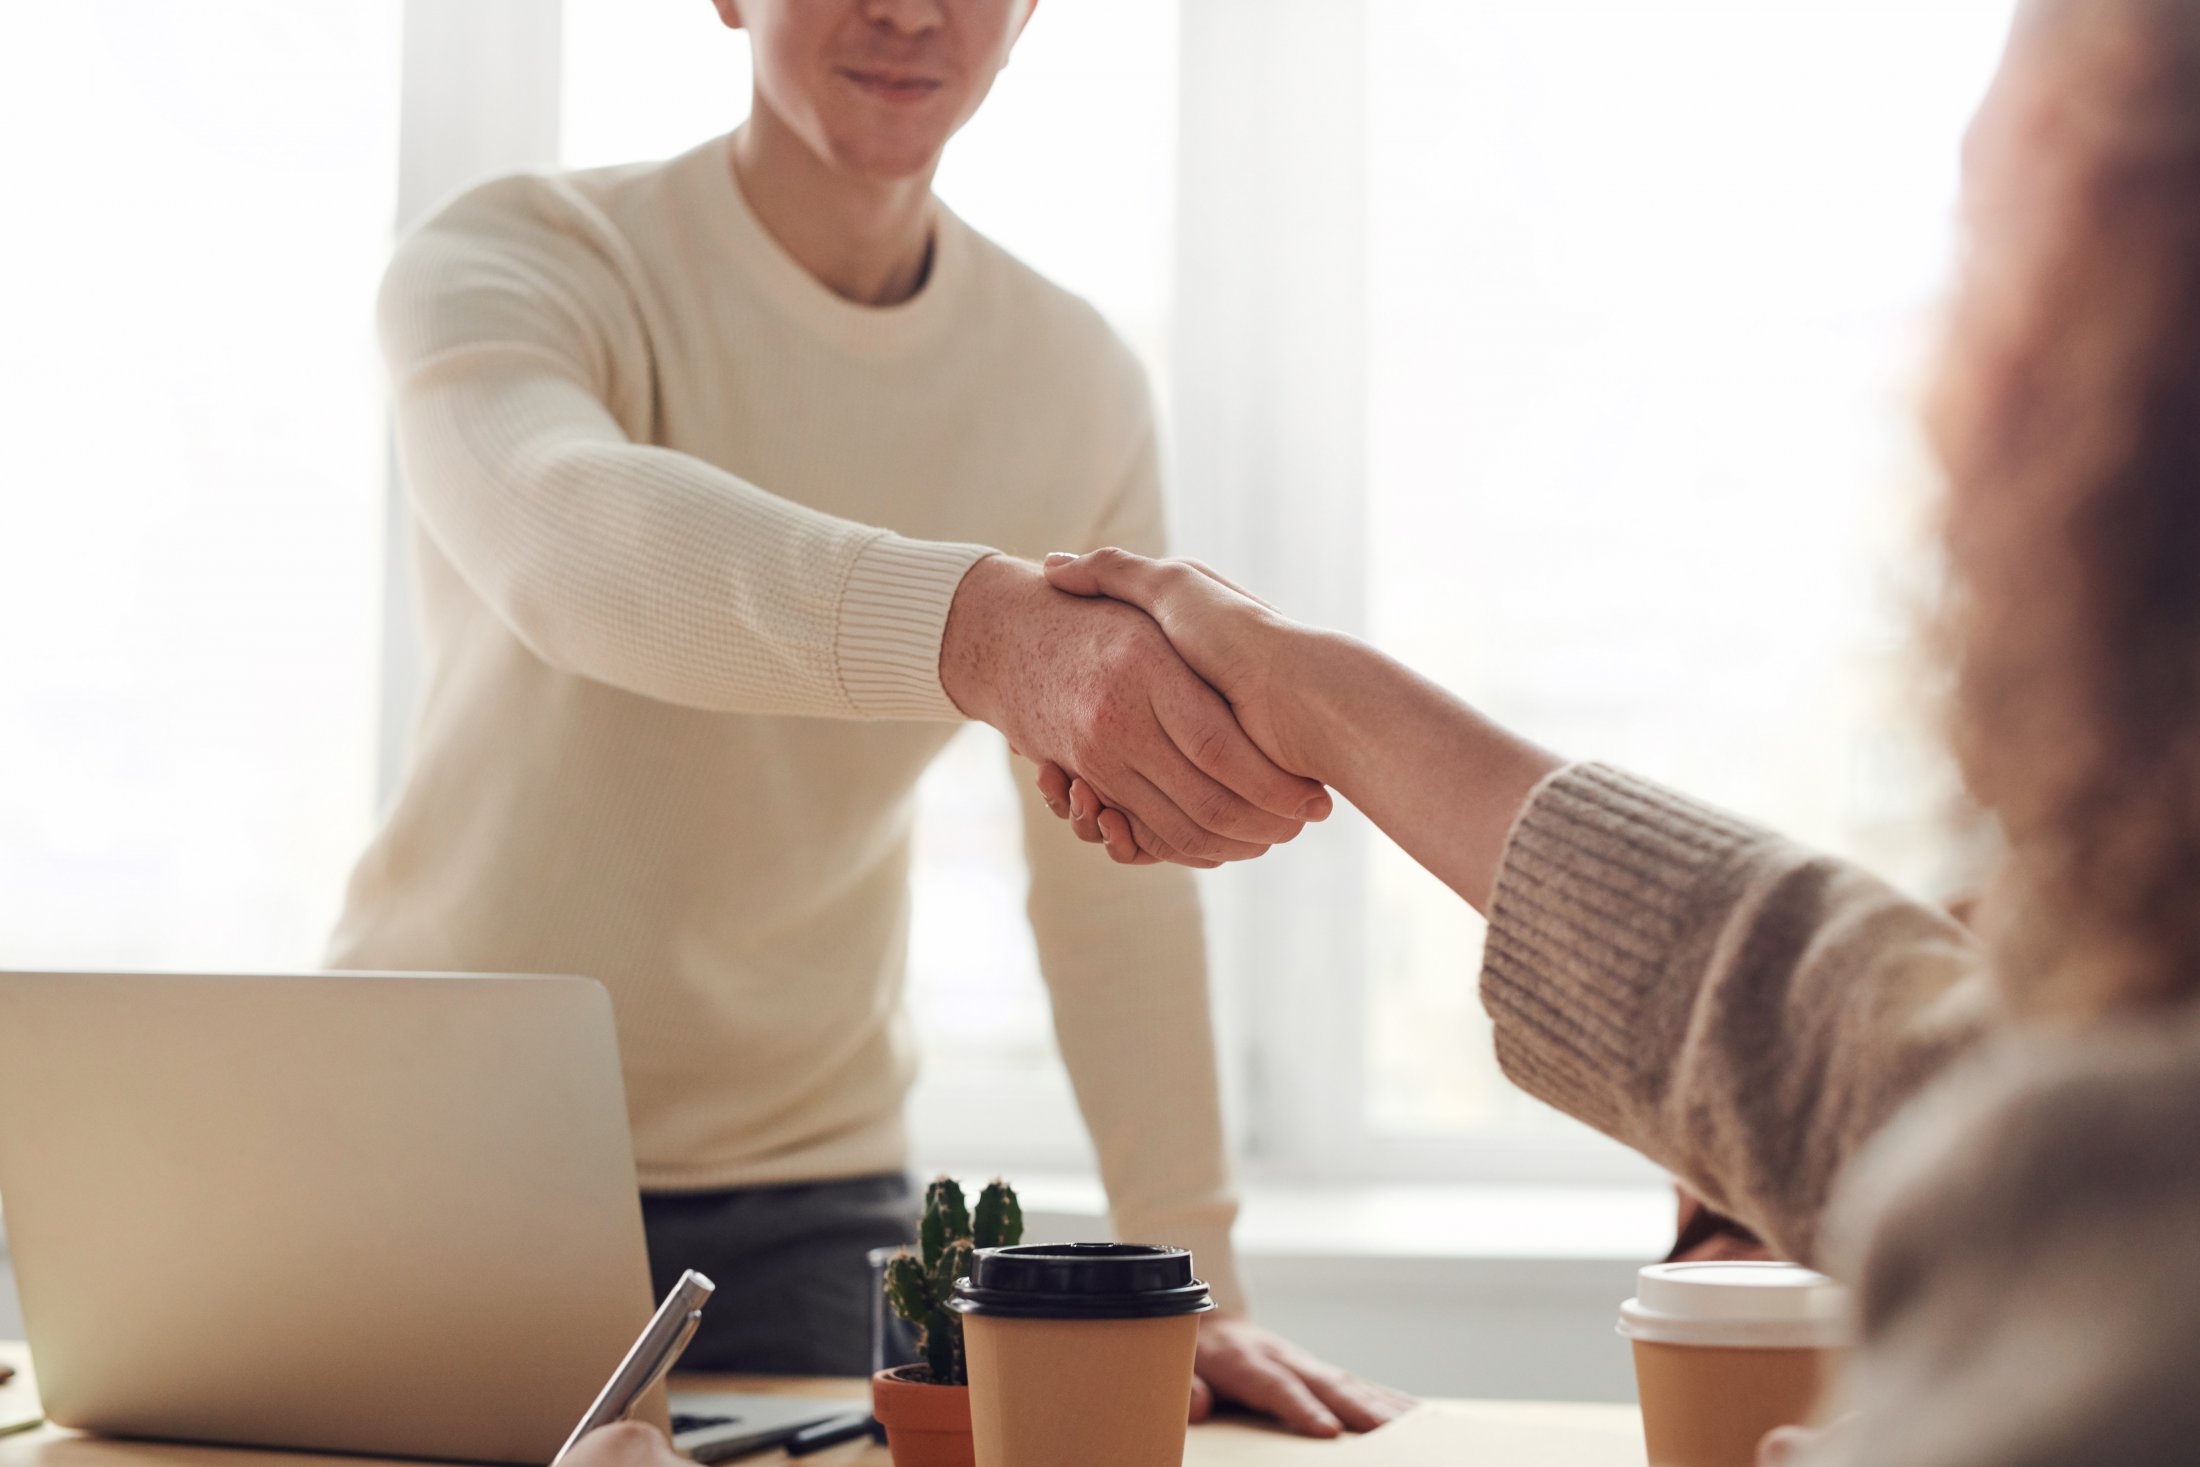 Candidate shaking hands with interview at a job interview